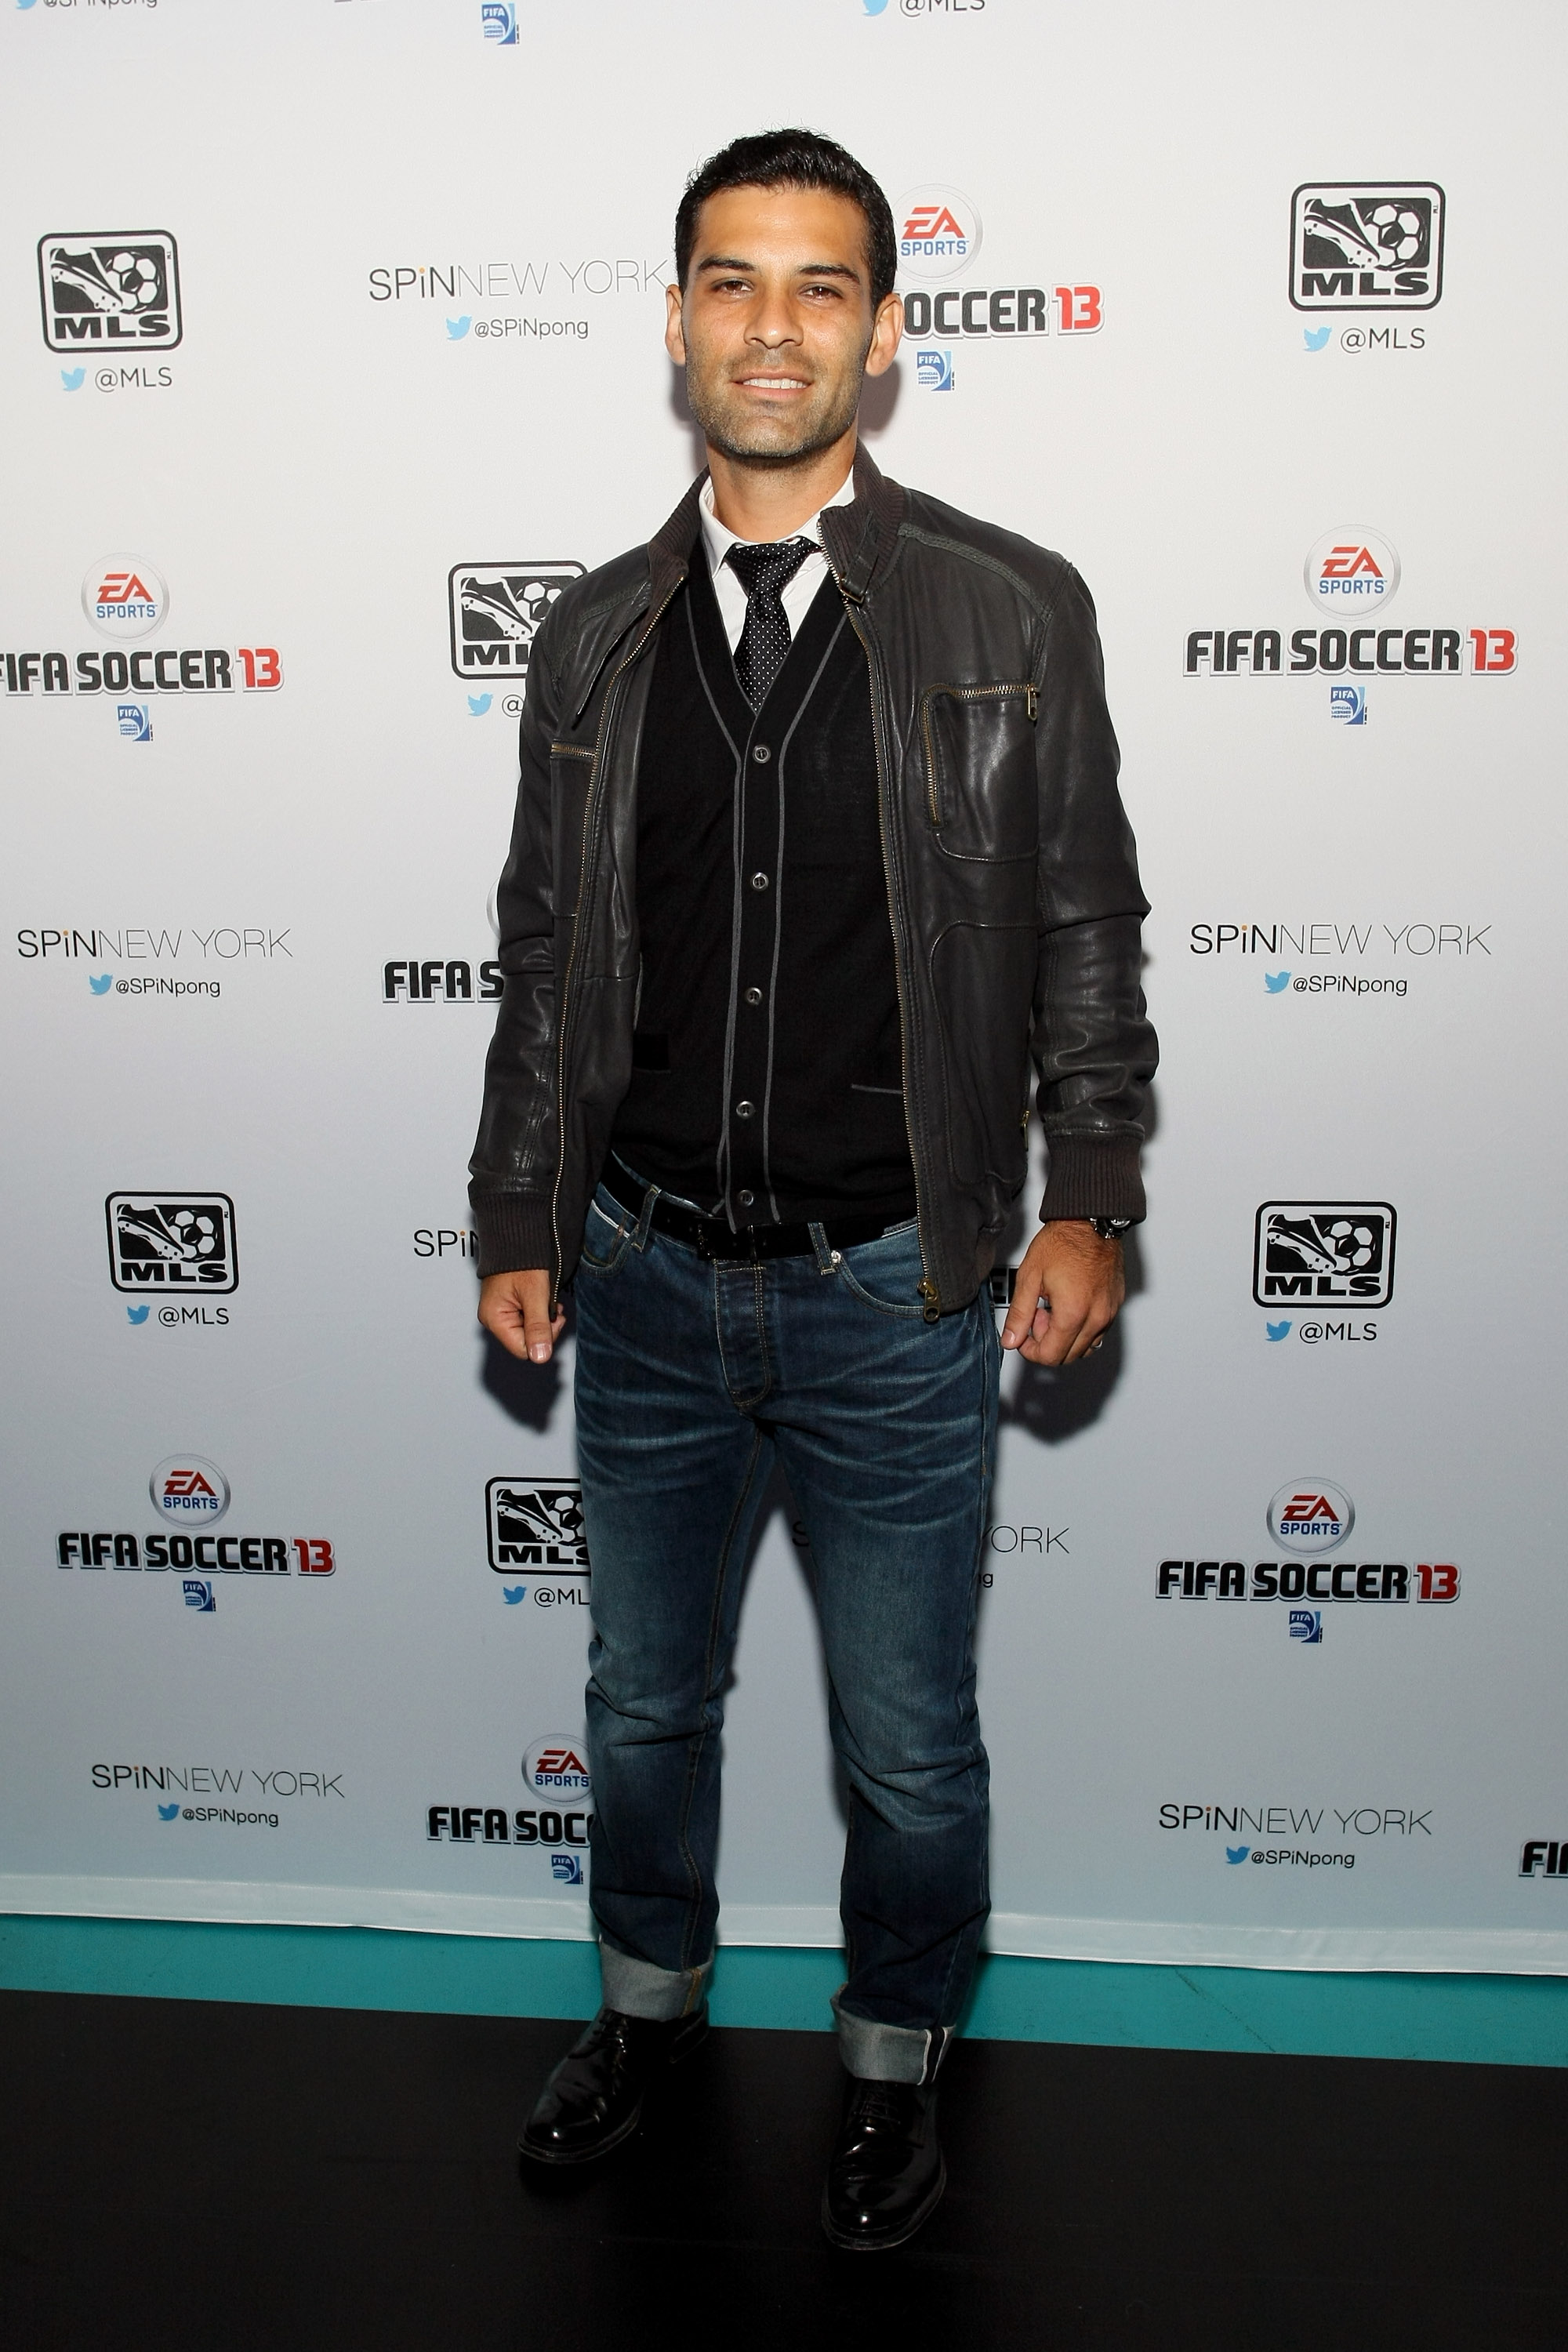 NEW YORK, NY - SEPTEMBER 24: Rafael Marquez of The New York Red Bulls attends the FIFA Soccer 13 launch tournament at SPiN New York on September 24, 2012 in New York City. (Photo by Neilson Barnard/Getty Images)